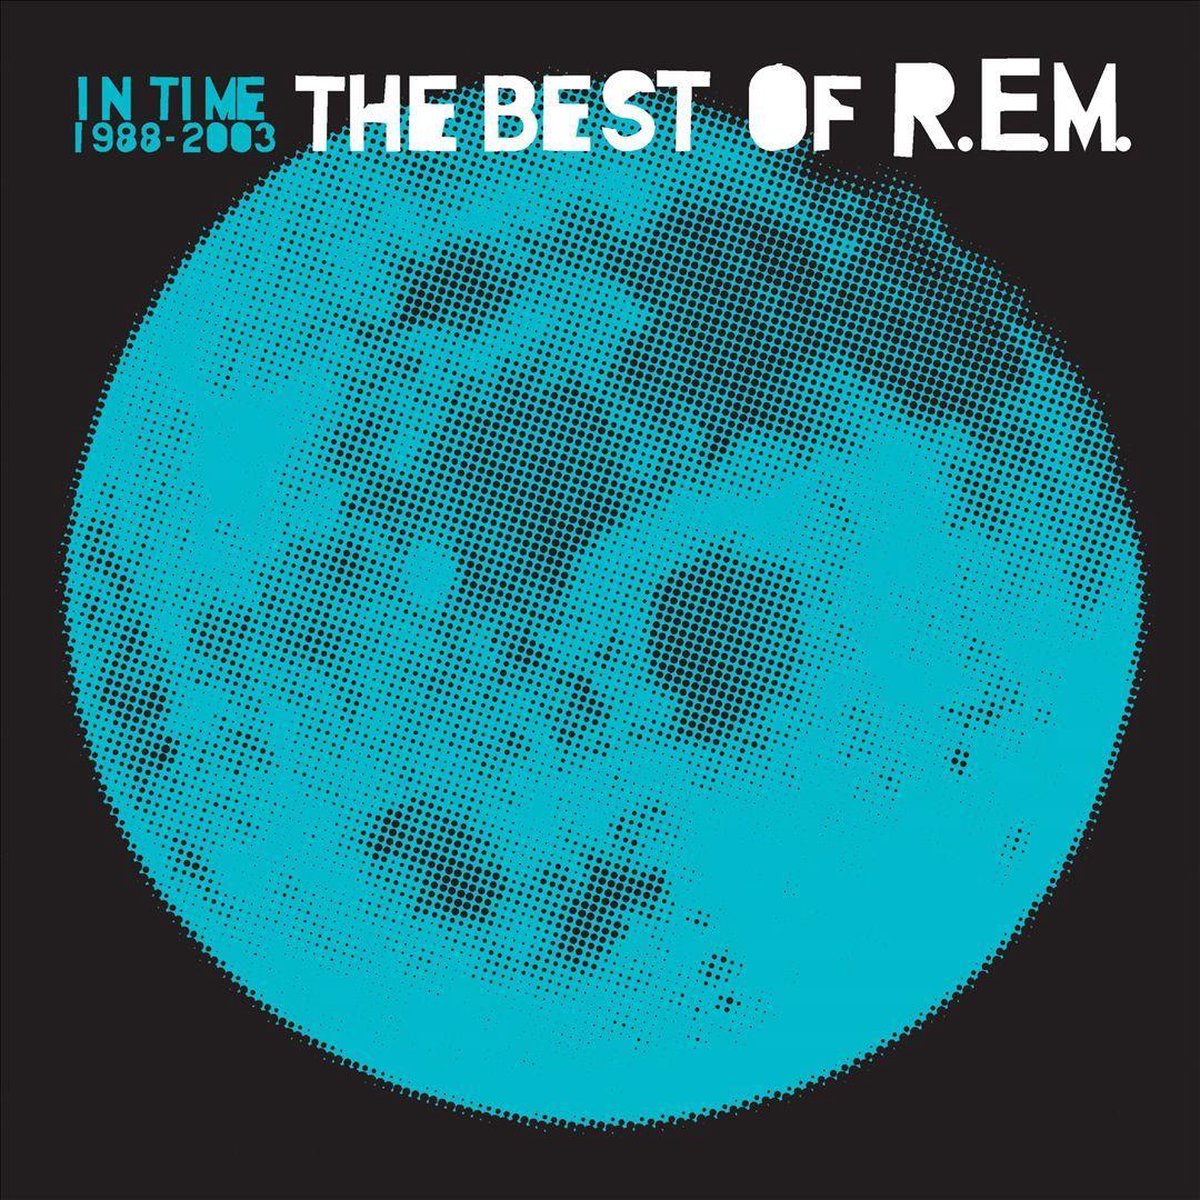 R.E.M. — In Time: The Best Of R.E.M. 1988-2003 cover artwork